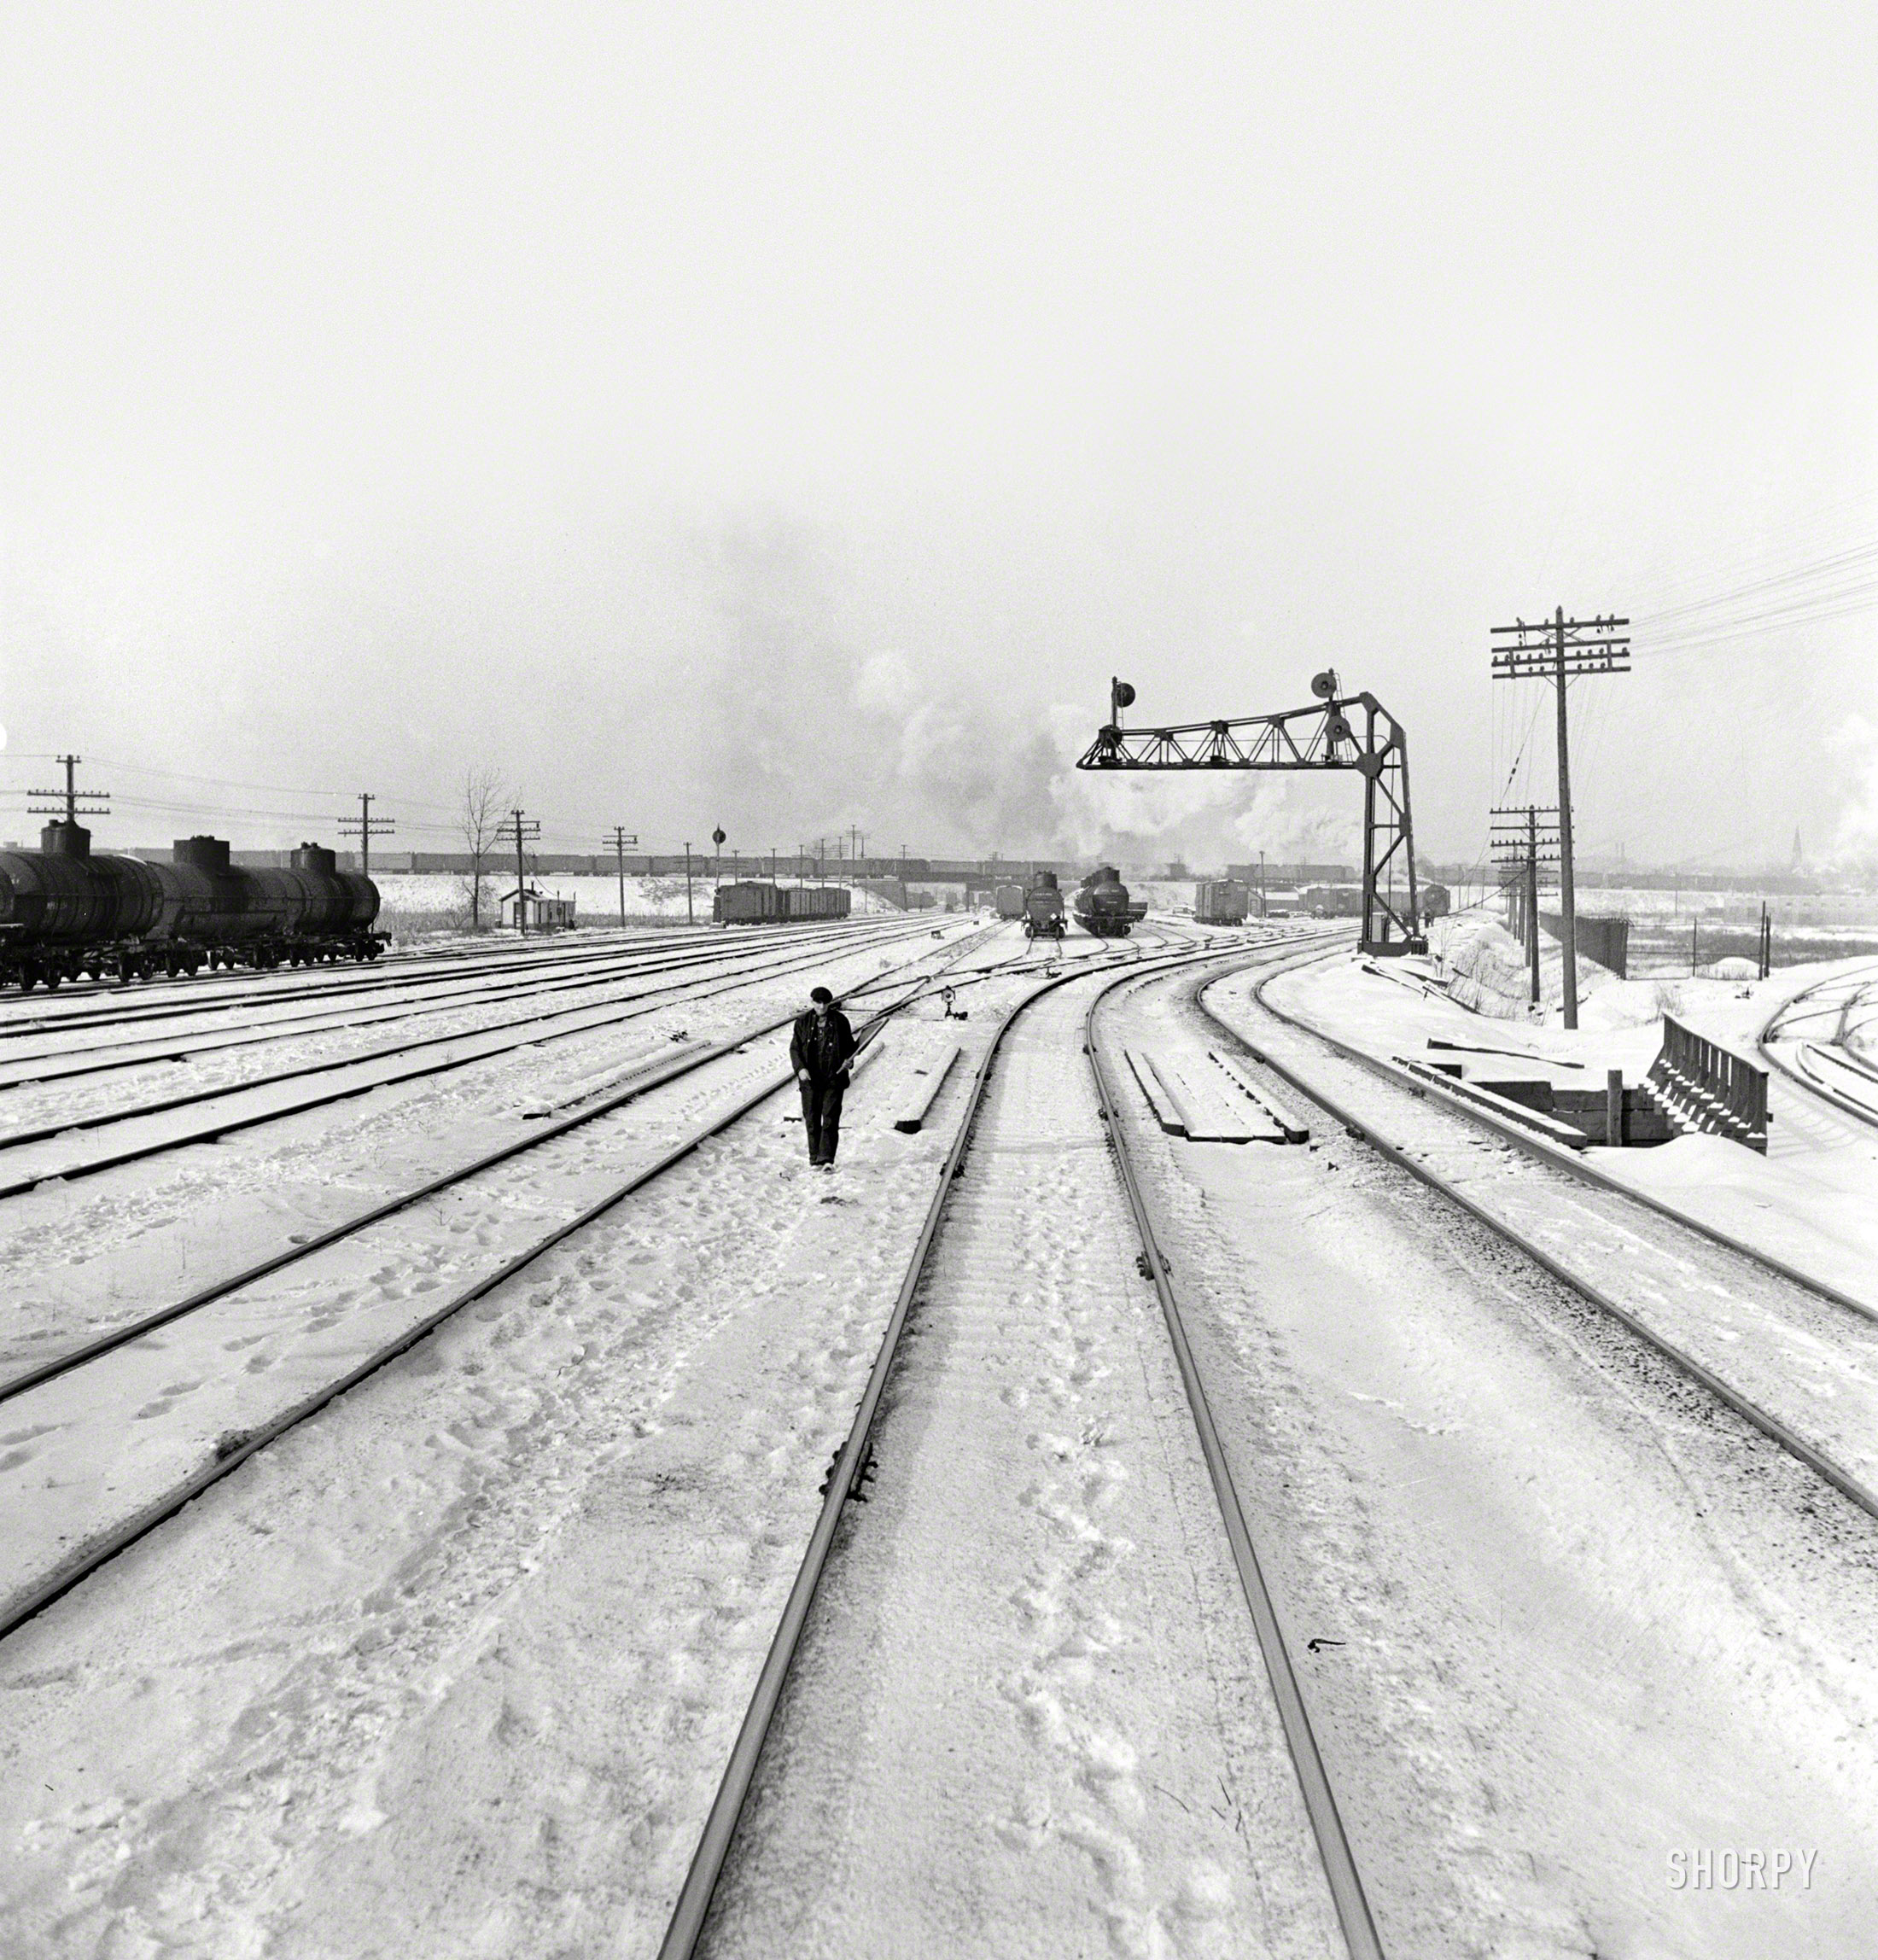 January 1943. Chicago, Illinois. "Freight operations on the Indiana Harbor Belt railroad between Chicago and Hammond, Indiana. The Chicago & North Western Railroad yard." Photo by Jack Delano, Office of War Information. View full size.